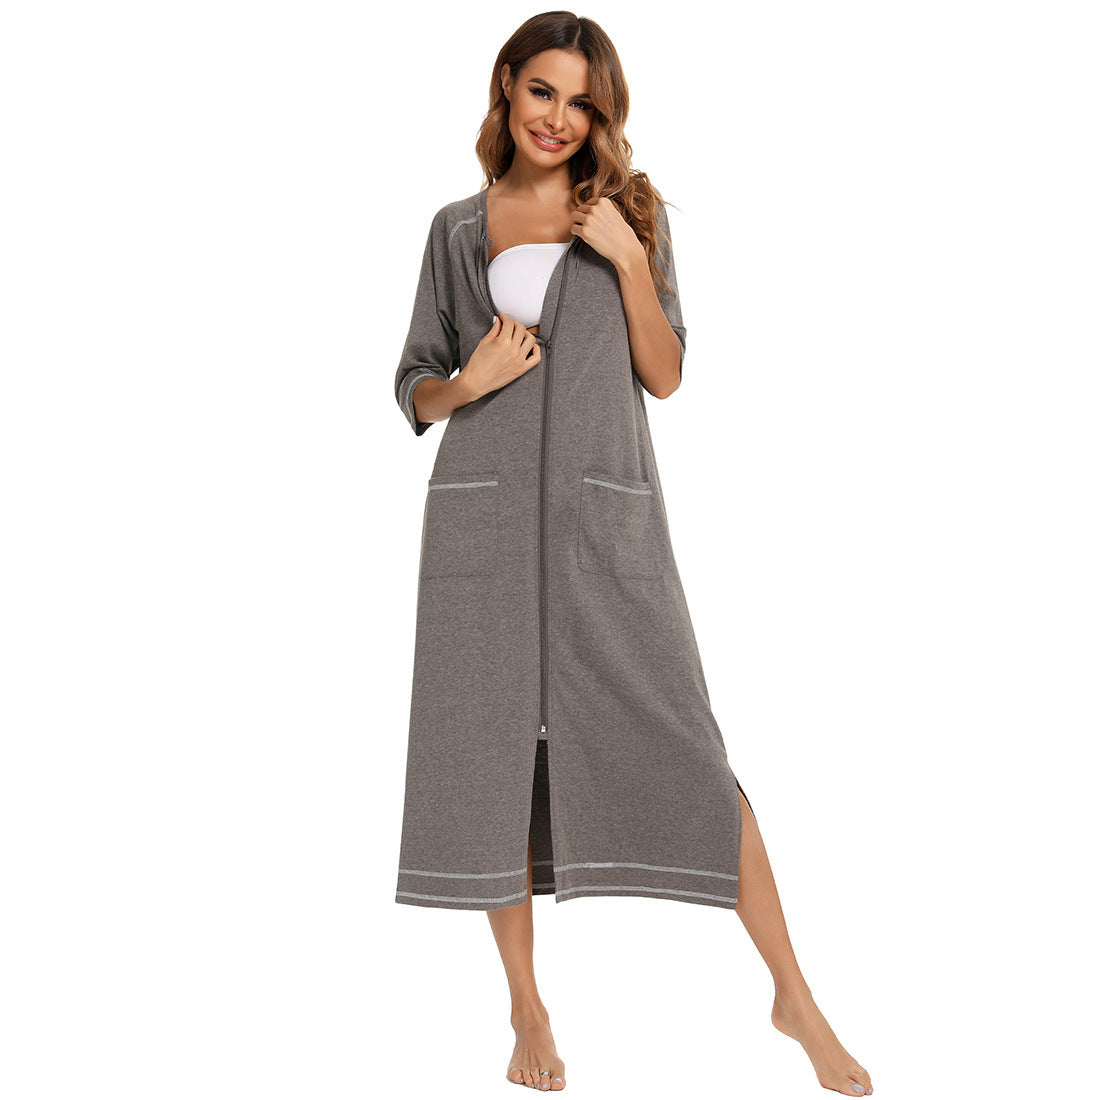 Home Wear Comfort And Casual Pregnant Women Breastfeeding Skirt Loose Pajamas 34 Sleeve Plus Size Robe